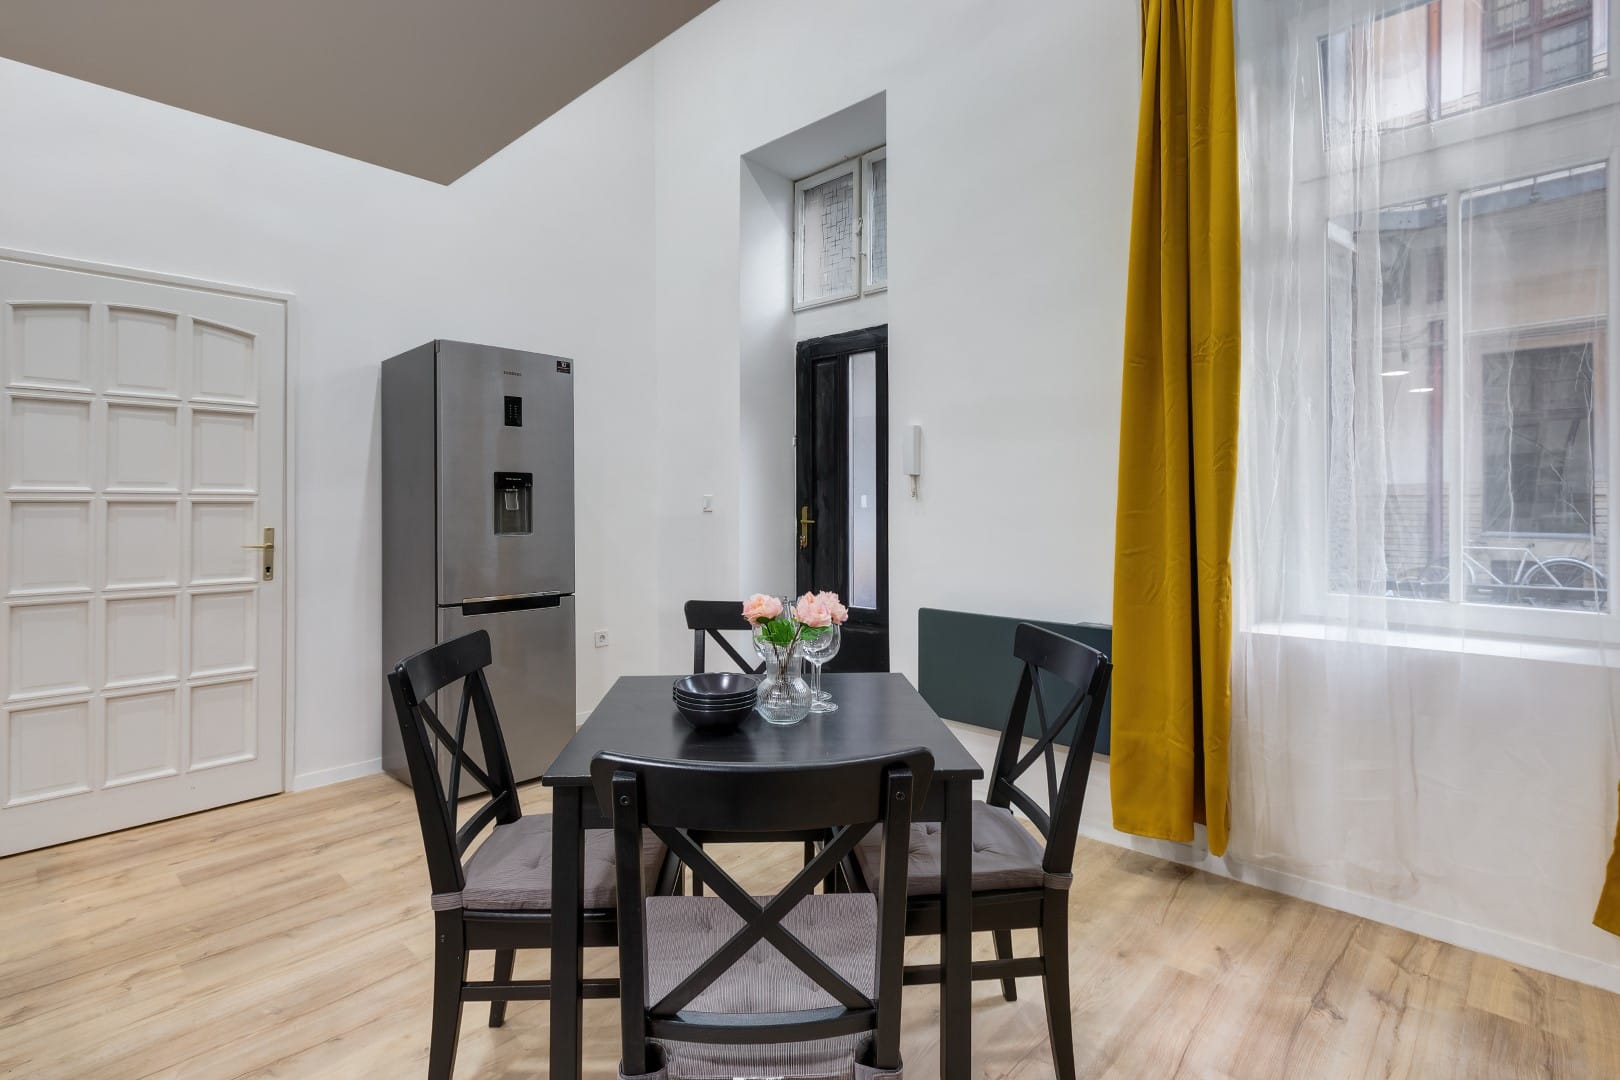 budapest-apartments-for-sale-renovated-flat-for-sale-downtown-real-estate-budapest-brand-new-studio-apartment-for-sal20